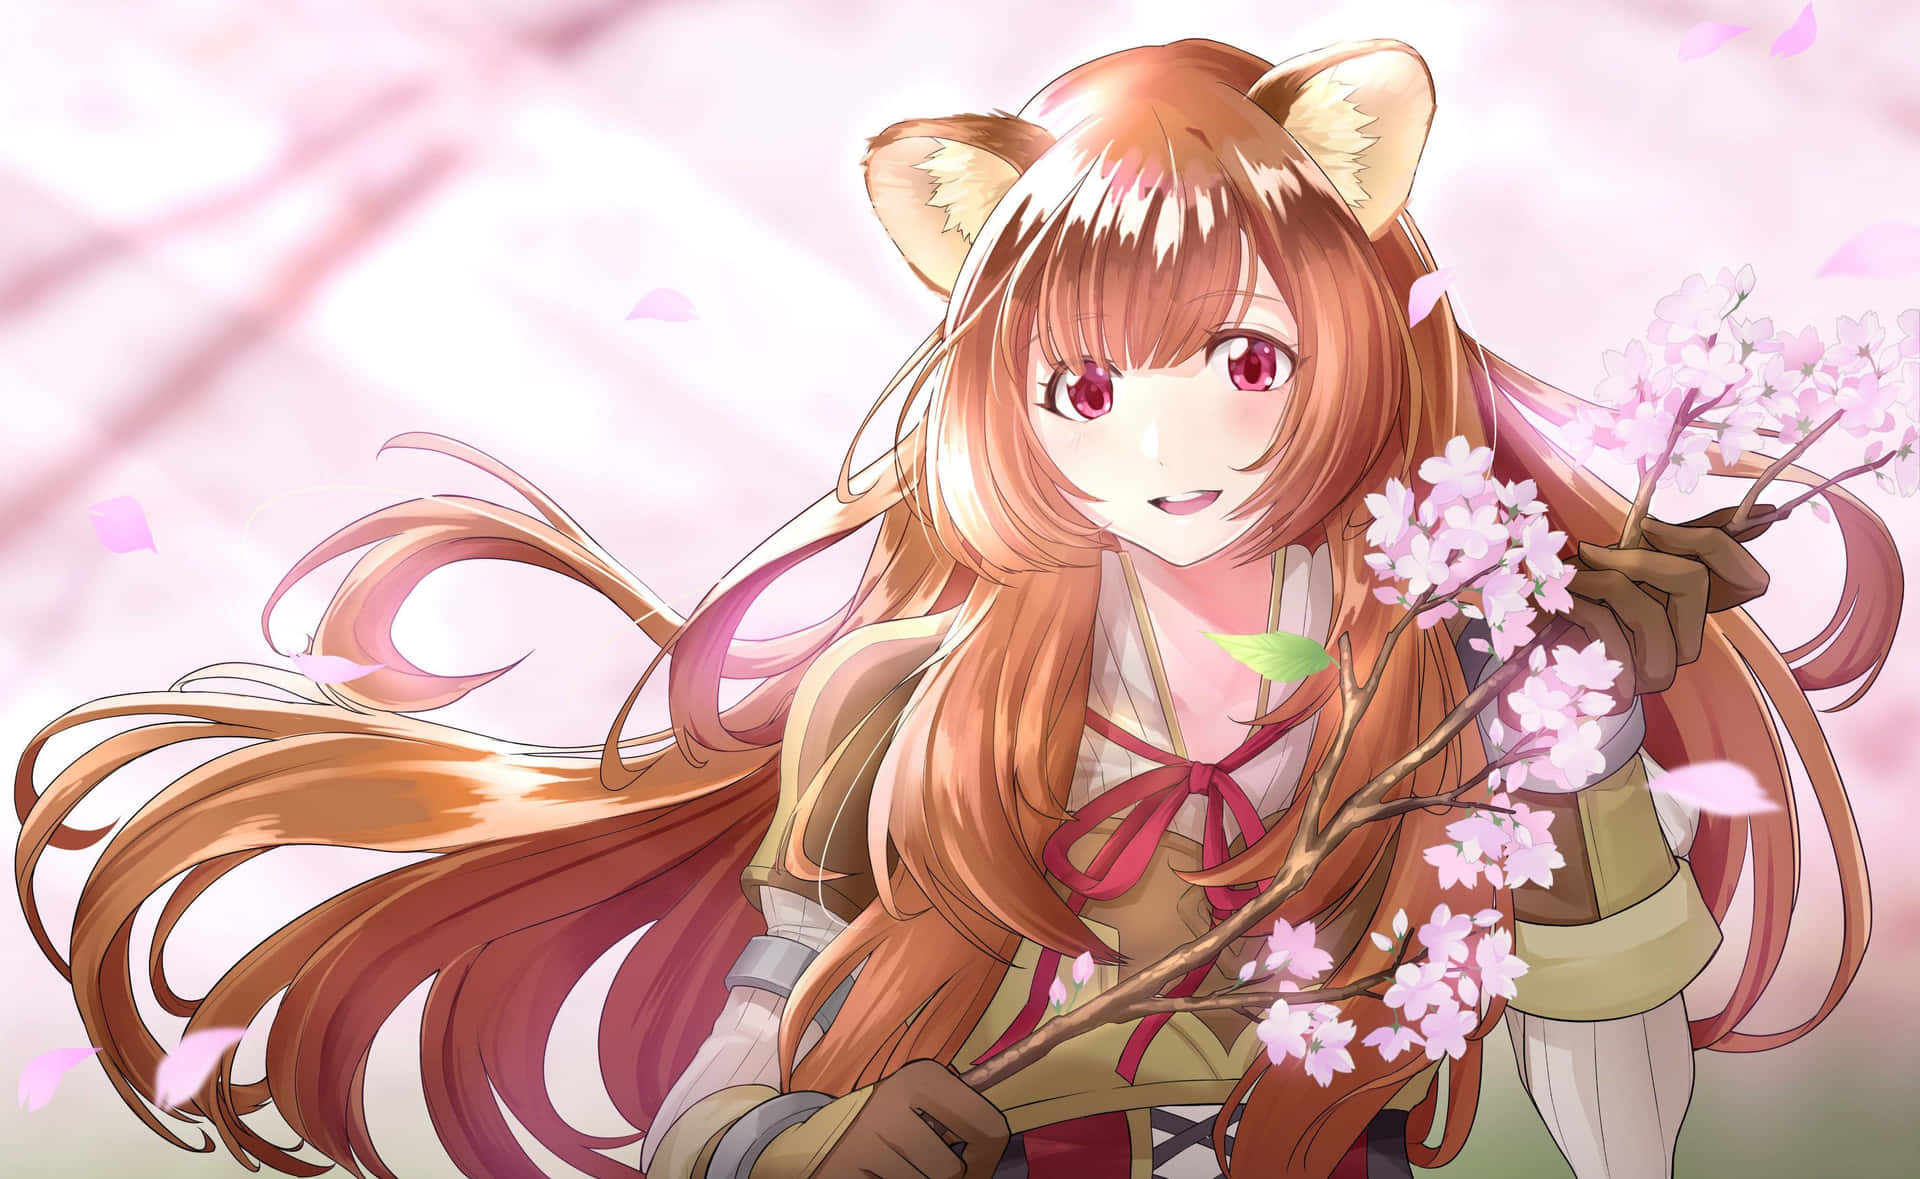 Experience a magical adventure with Raphtalia in her world